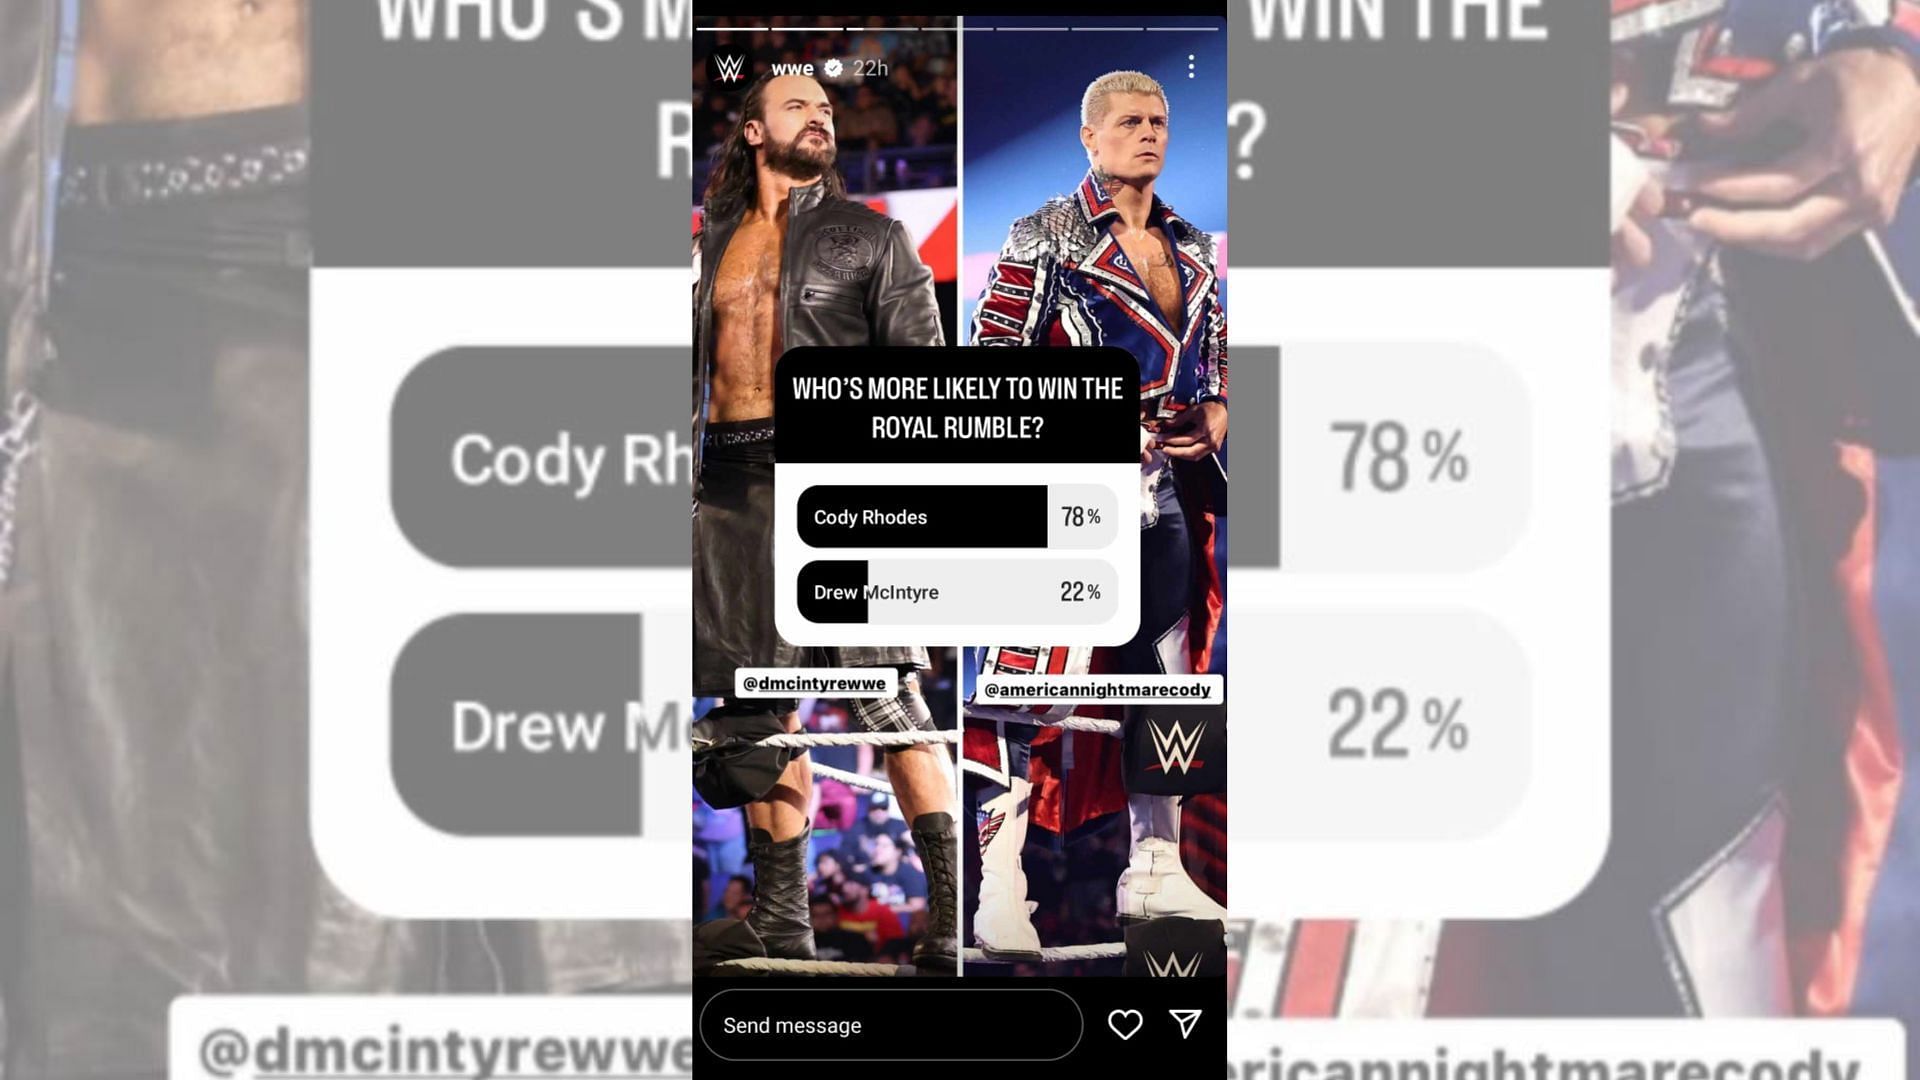 The WWE Universe believes Cody Rhodes has a better chance of winning the Royal Rumble